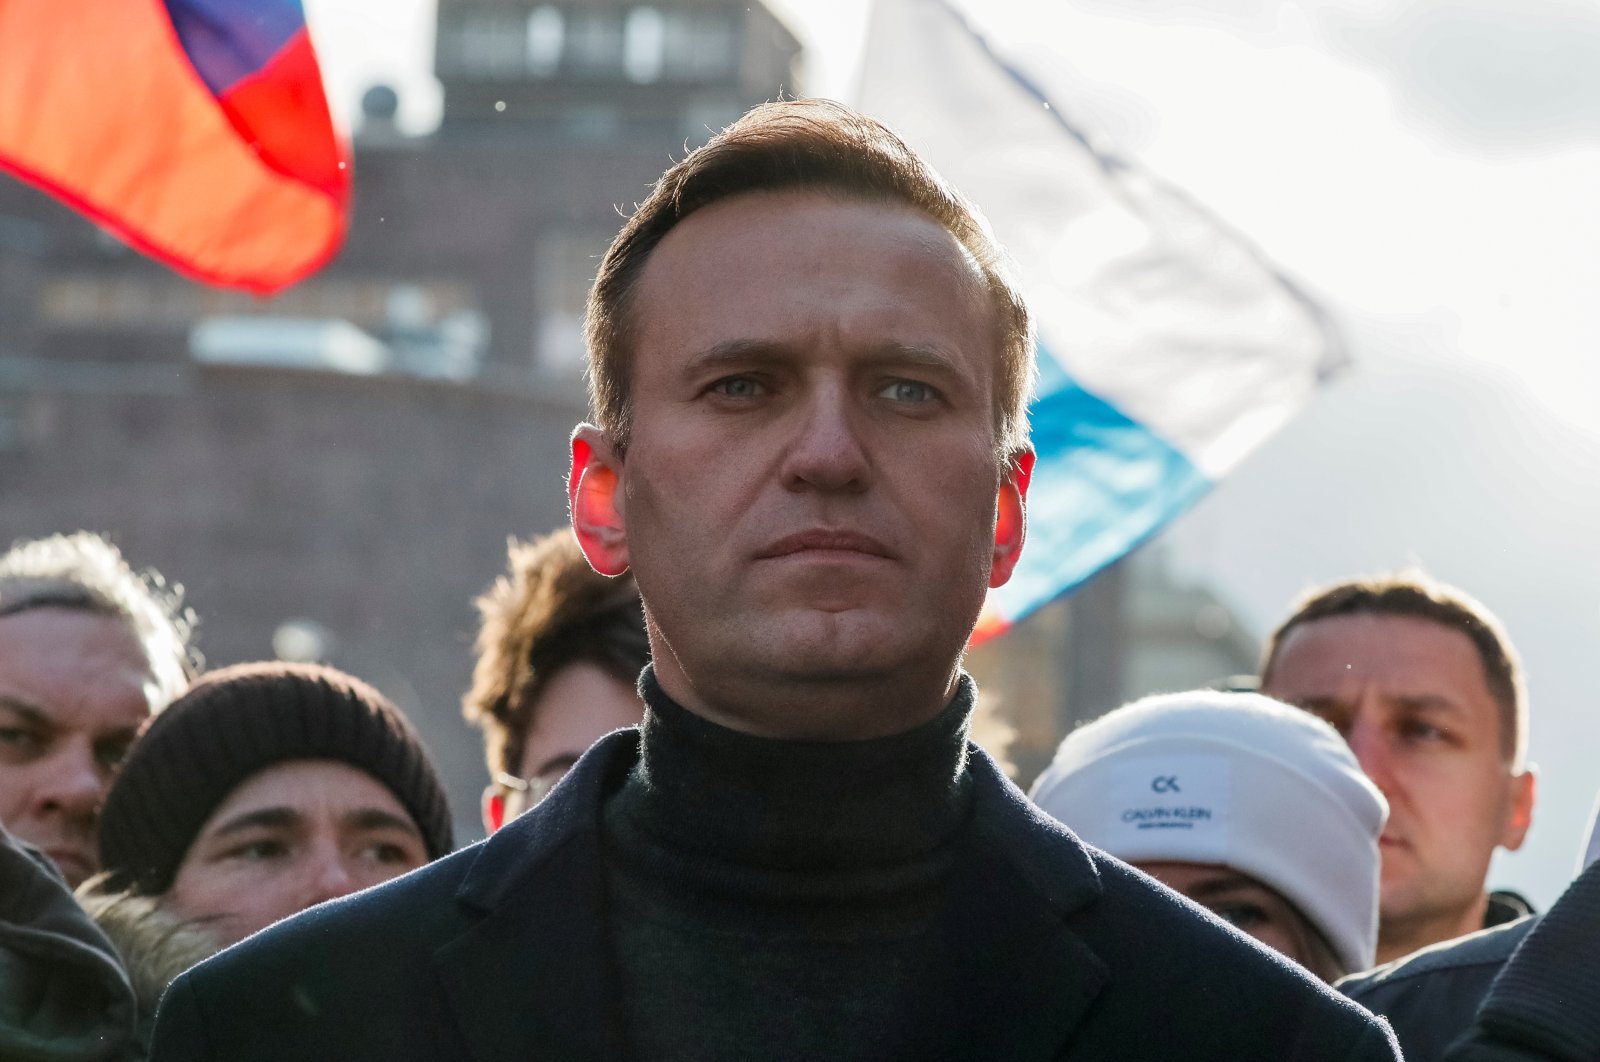 Russian opposition politician Alexei Navalny takes part in a rally in Moscow, Russia, Feb. 29, 2020. (Reuters File Photo)